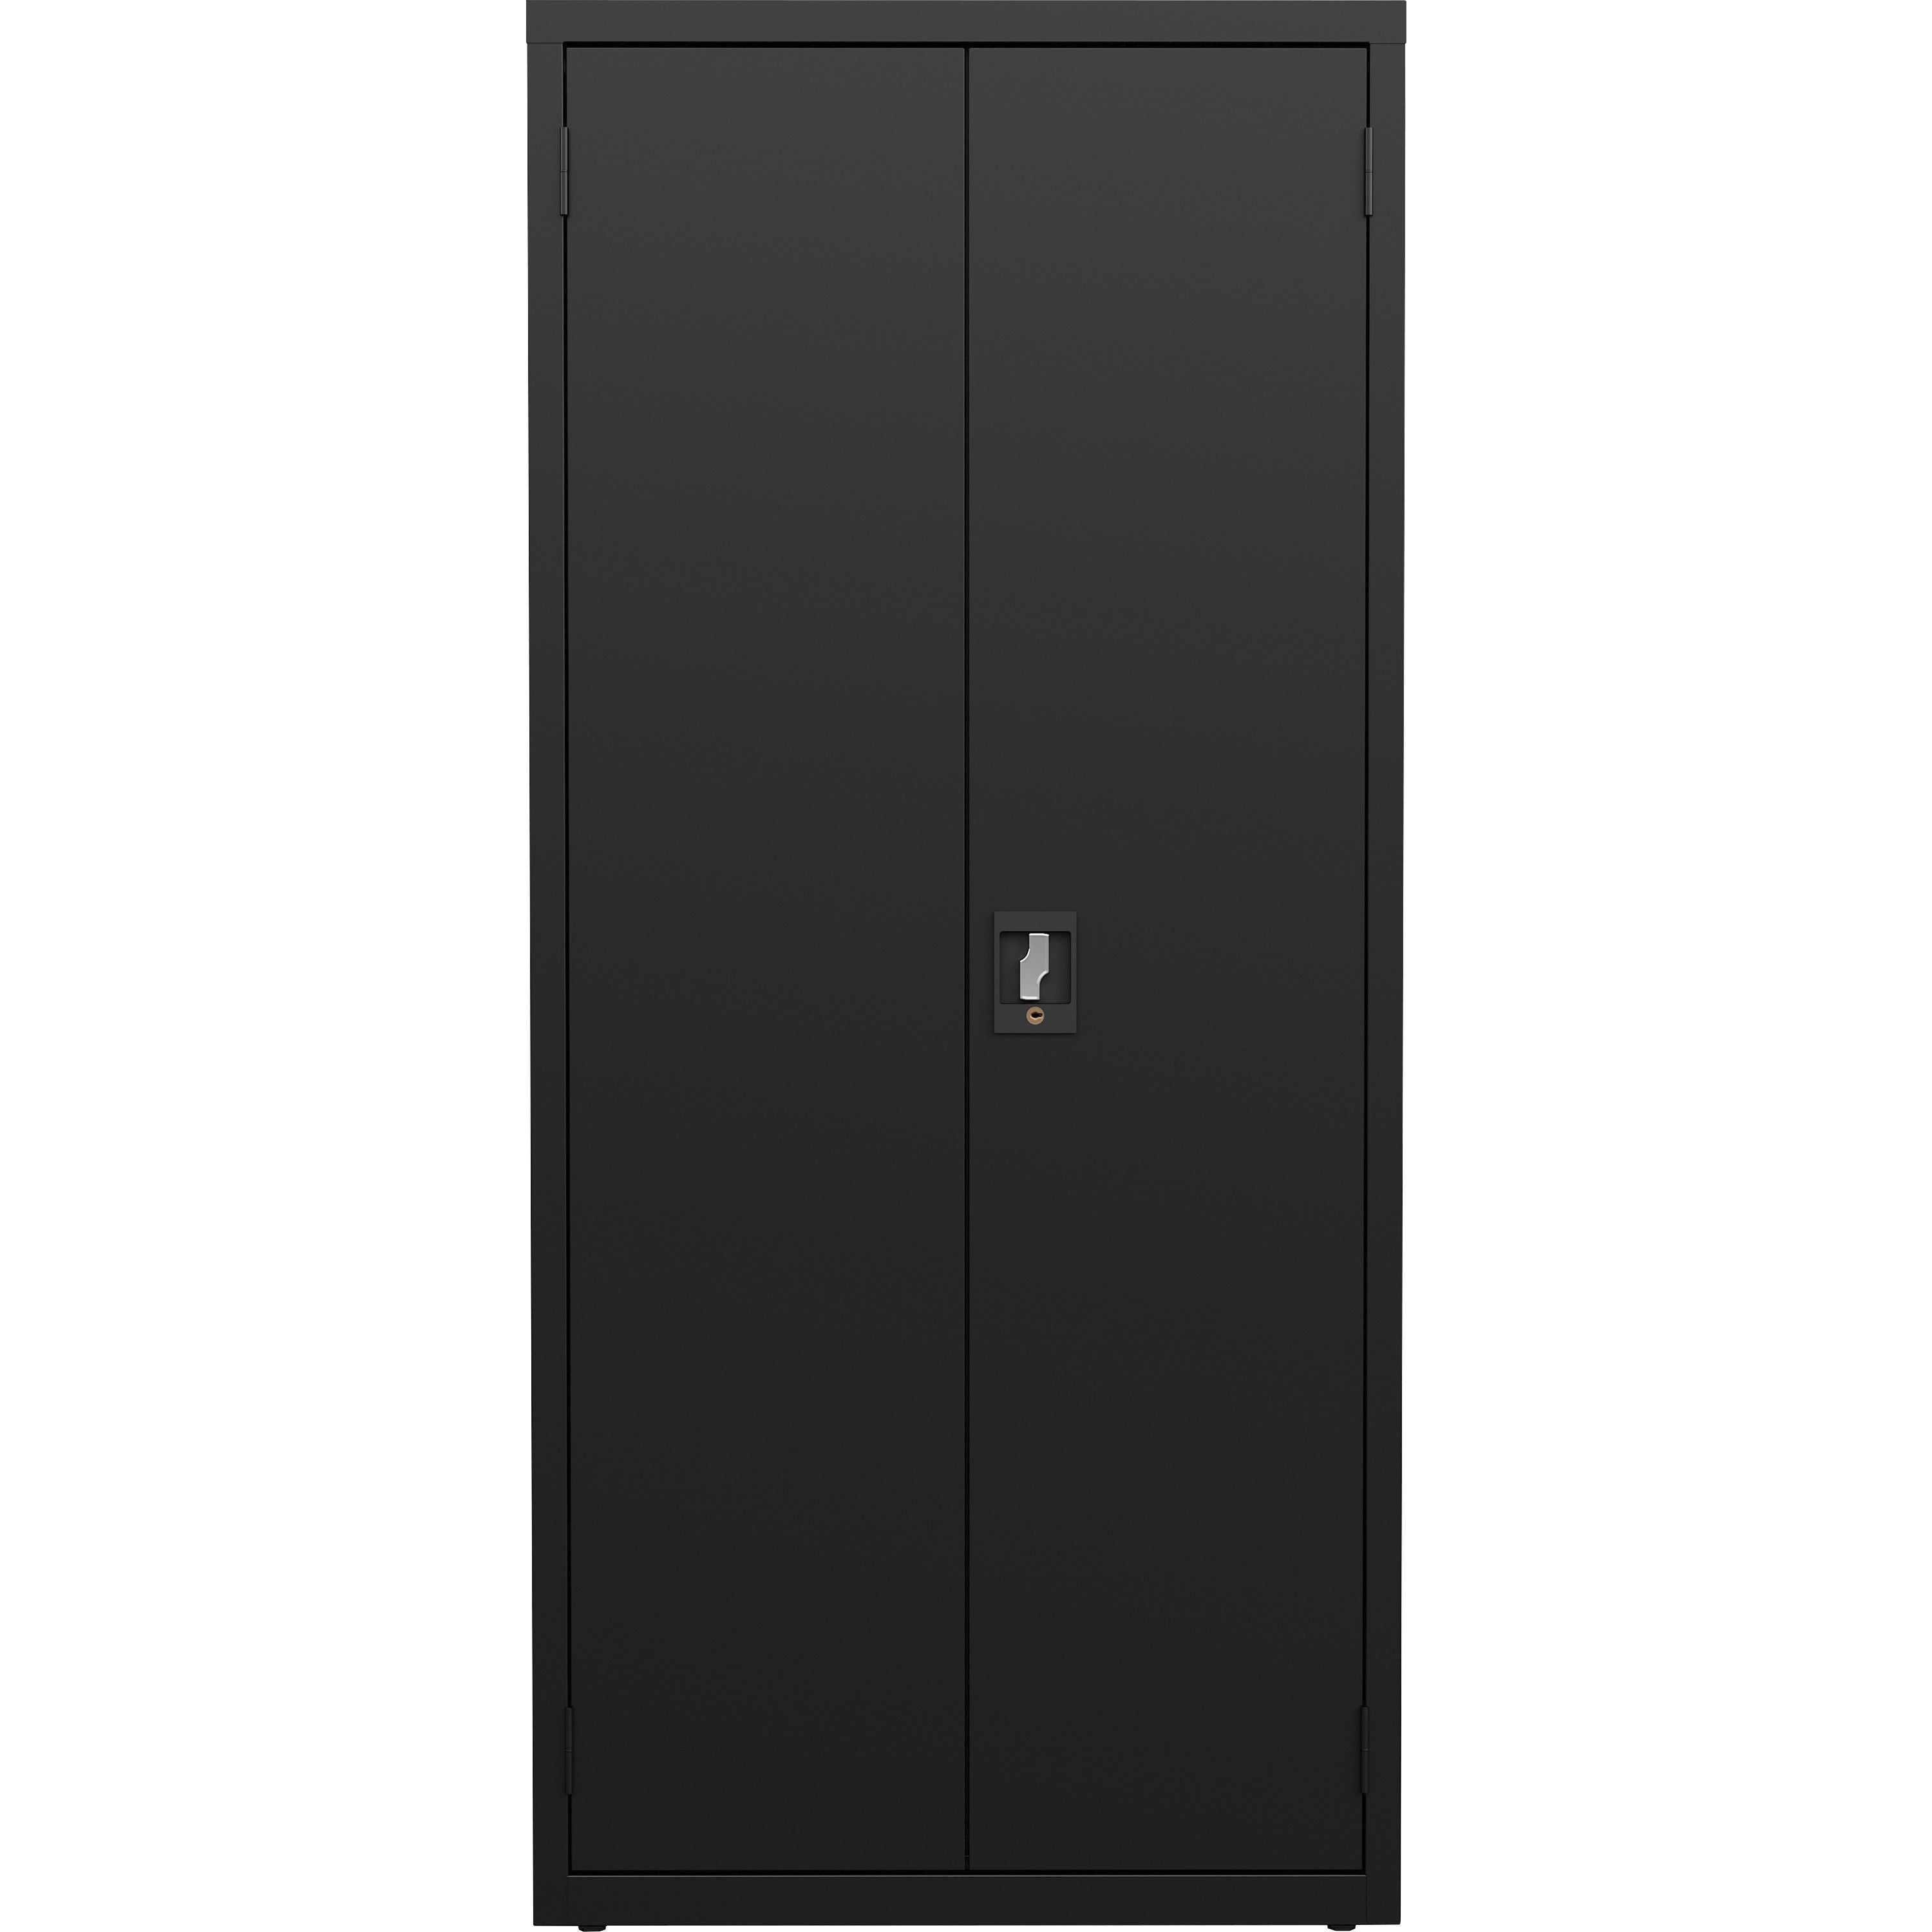 lorell-fortress-series-slimline-storage-cabinet-30-x-15-x-66-4-x-shelfves-720-lb-load-capacity-durable-welded-nonporous-surface-recessed-handle-removable-lock-locking-system-black-baked-enamel-steel-recycled_llr69830bk - 2